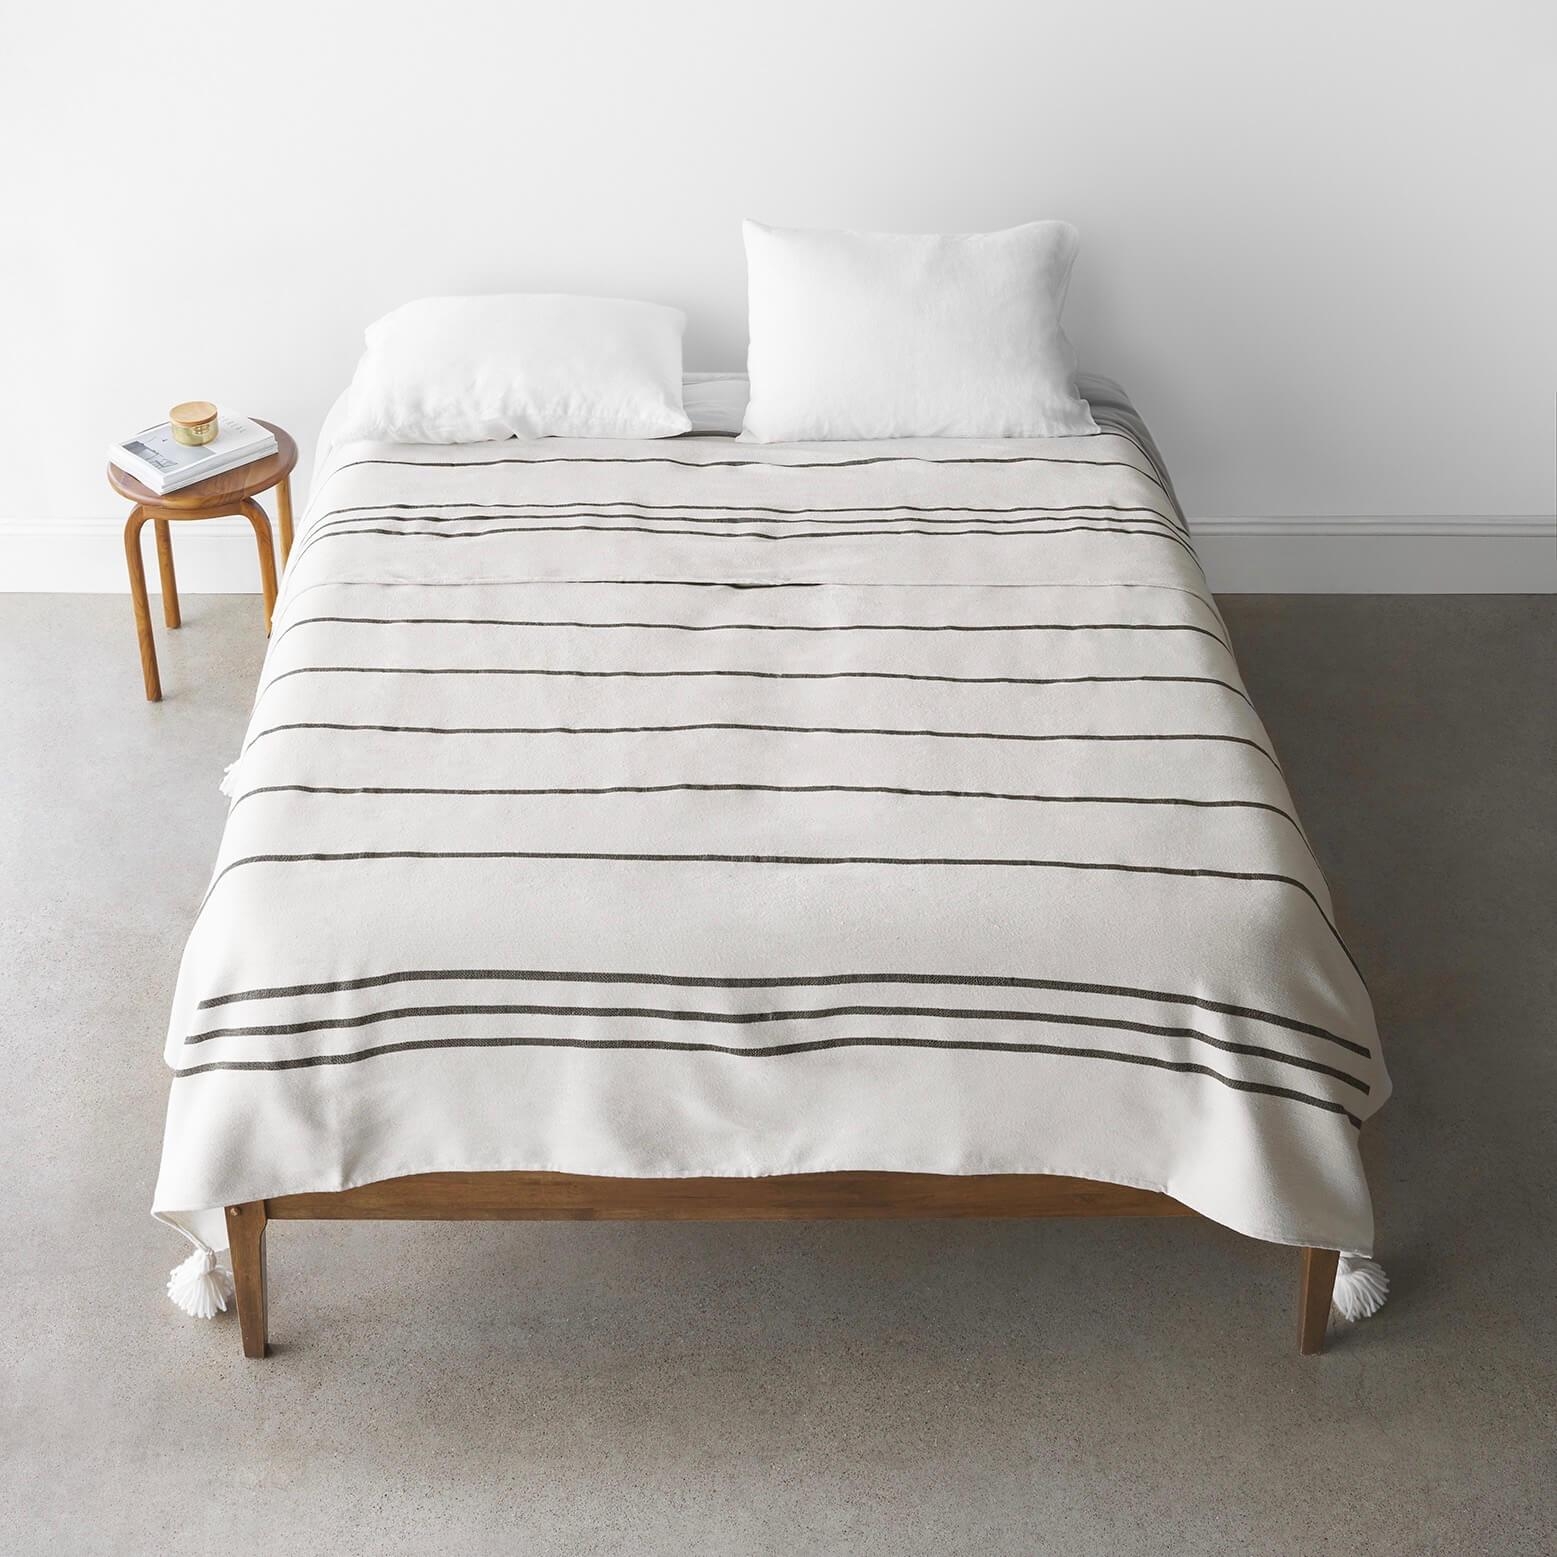 Safiyya Bed Blanket - Full/Queen By The Citizenry - Image 0